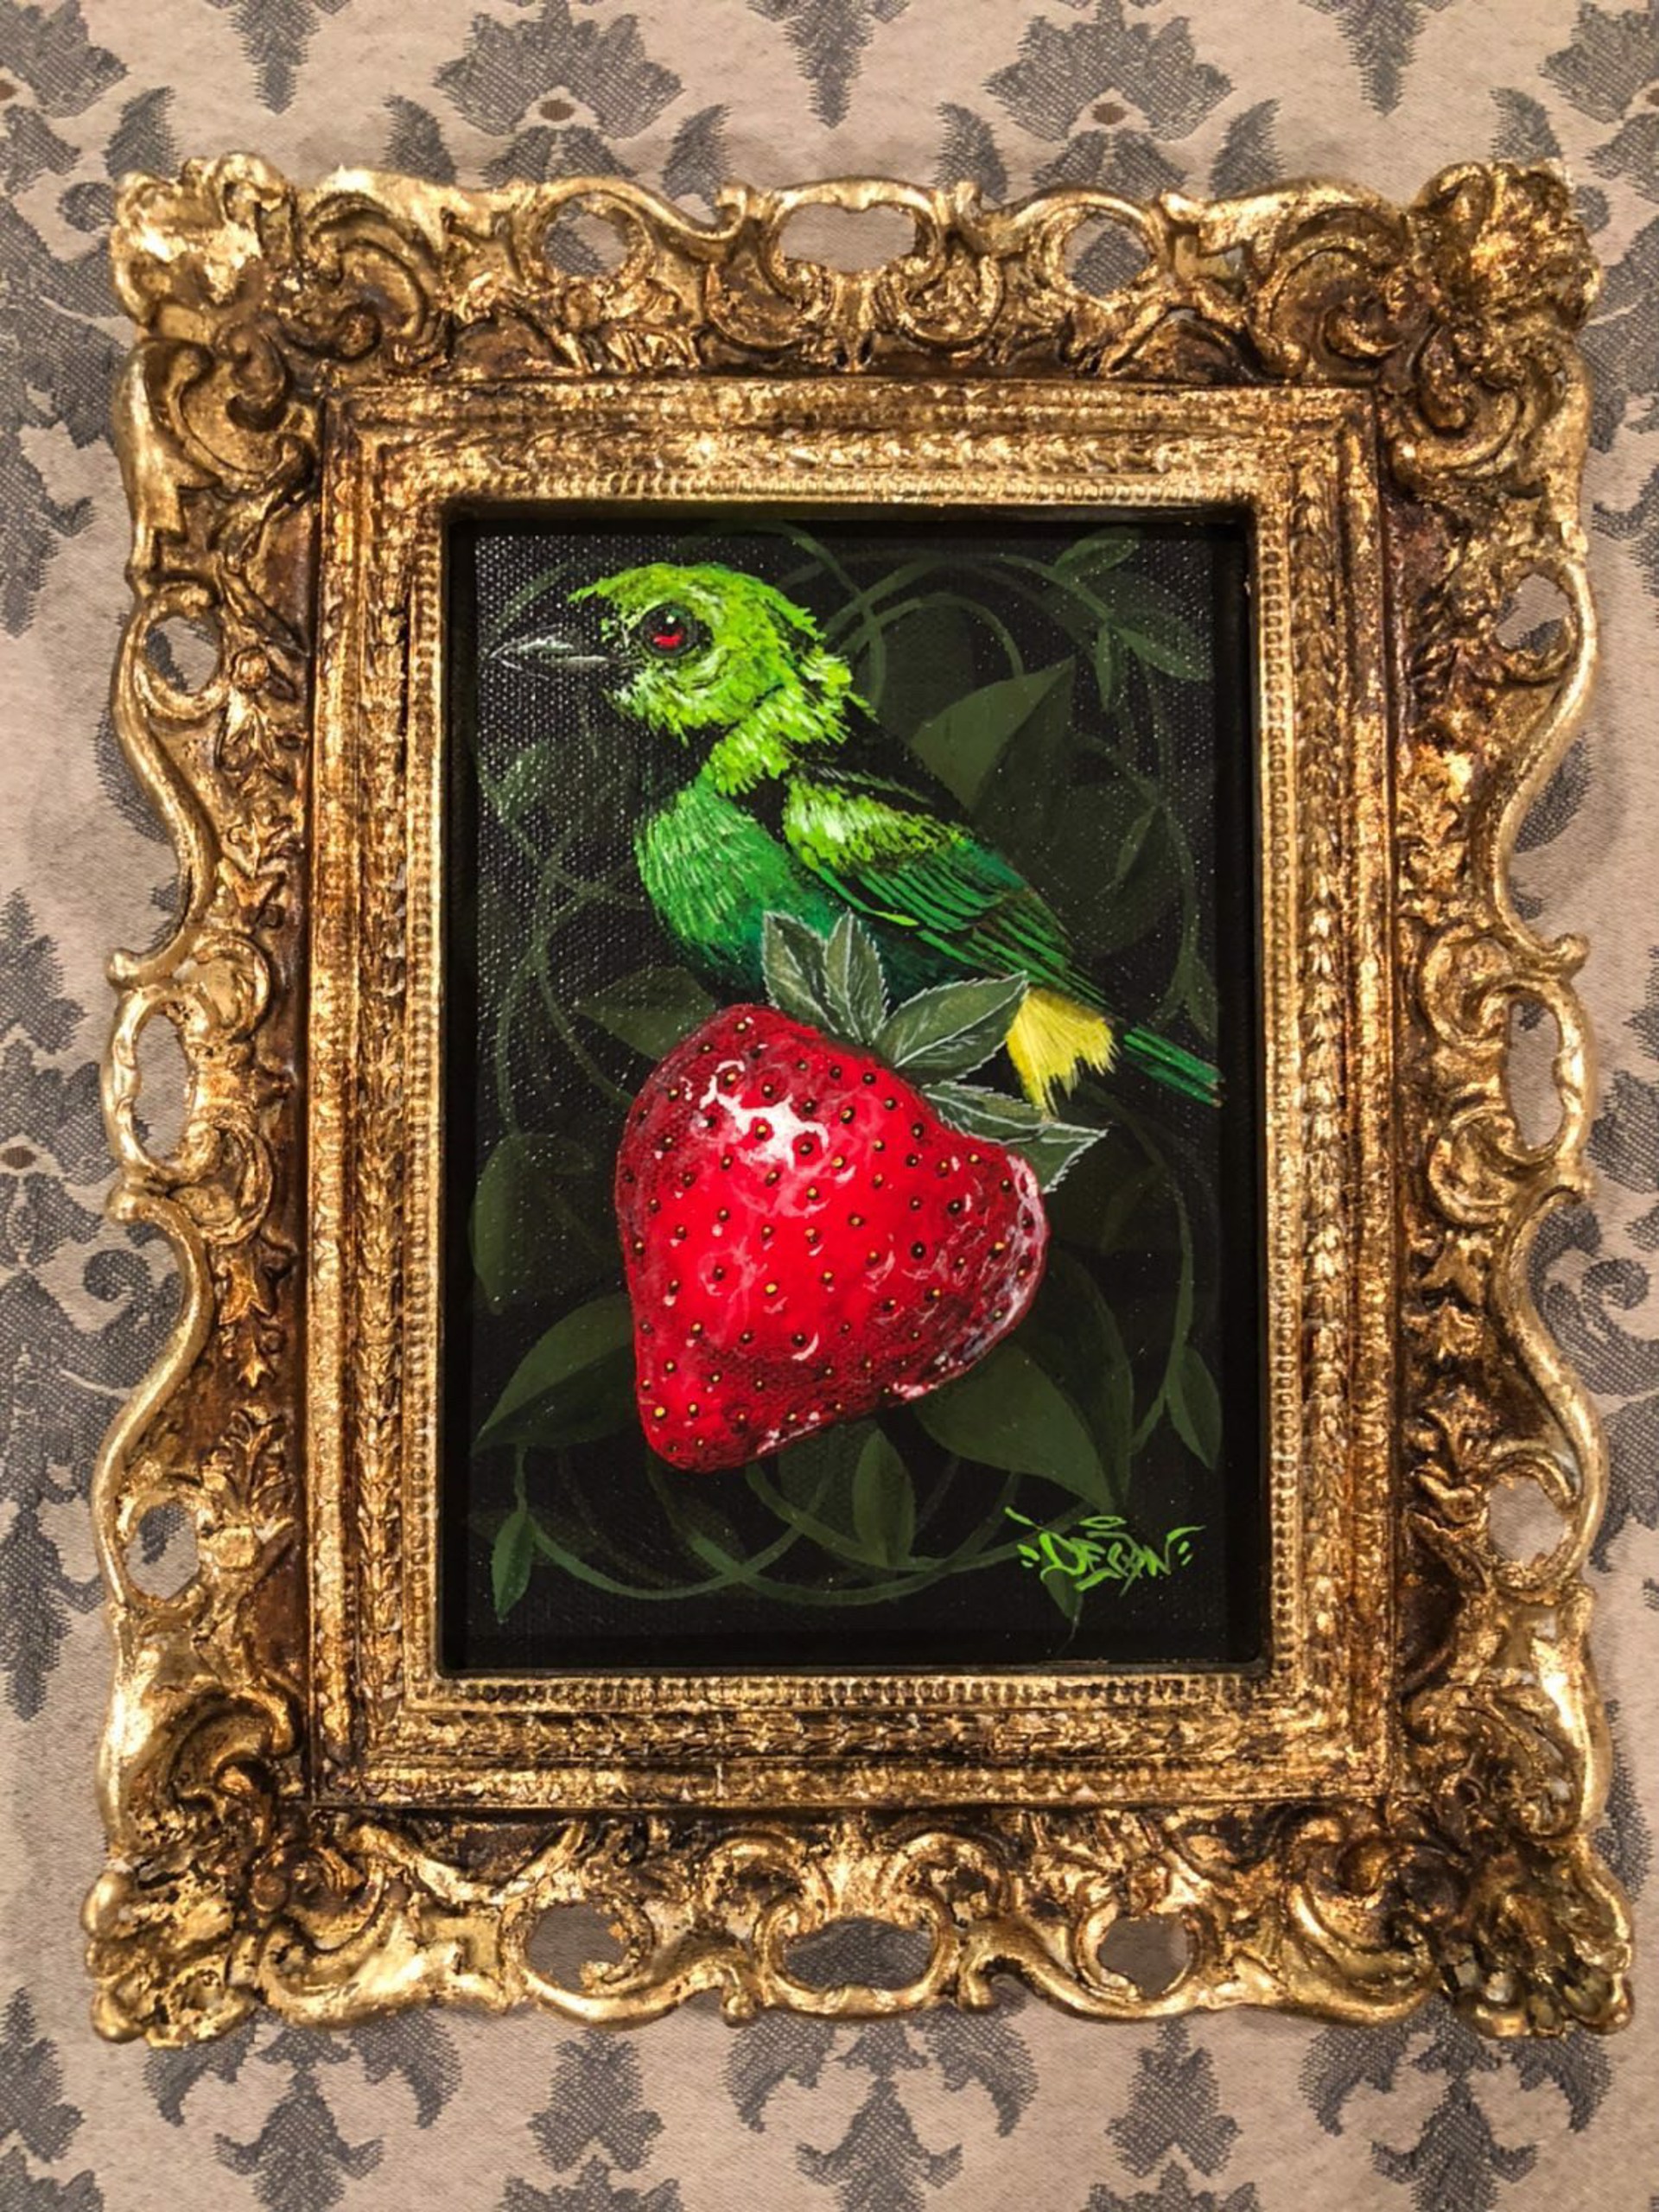 Strawberry by Anthony Deon